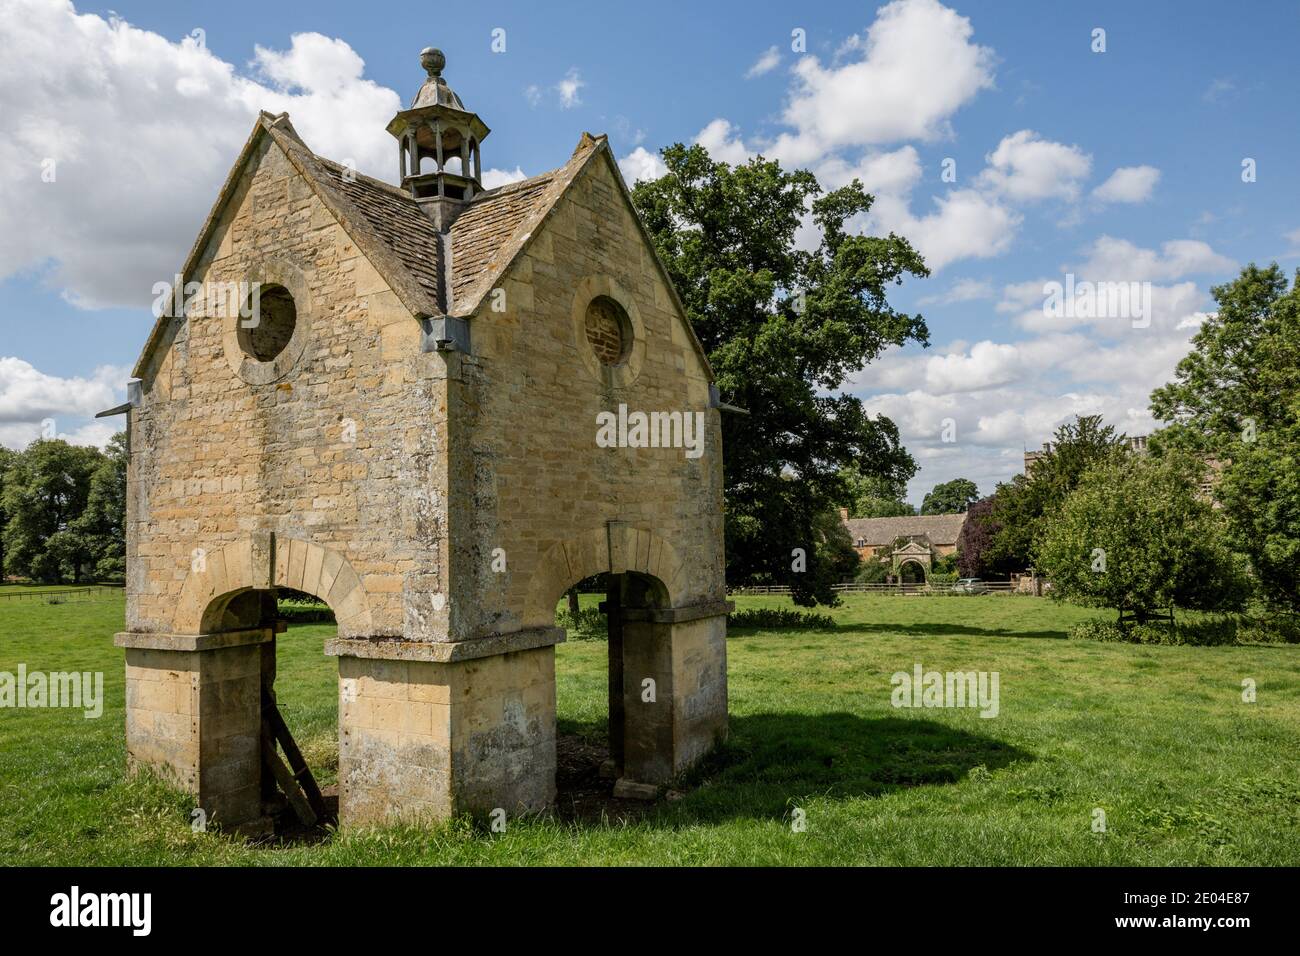 A dovecote near Chastleton House, a Jacobean country house situated at Chastleton near Moreton-in-Marsh, Oxfordshire. Stock Photo